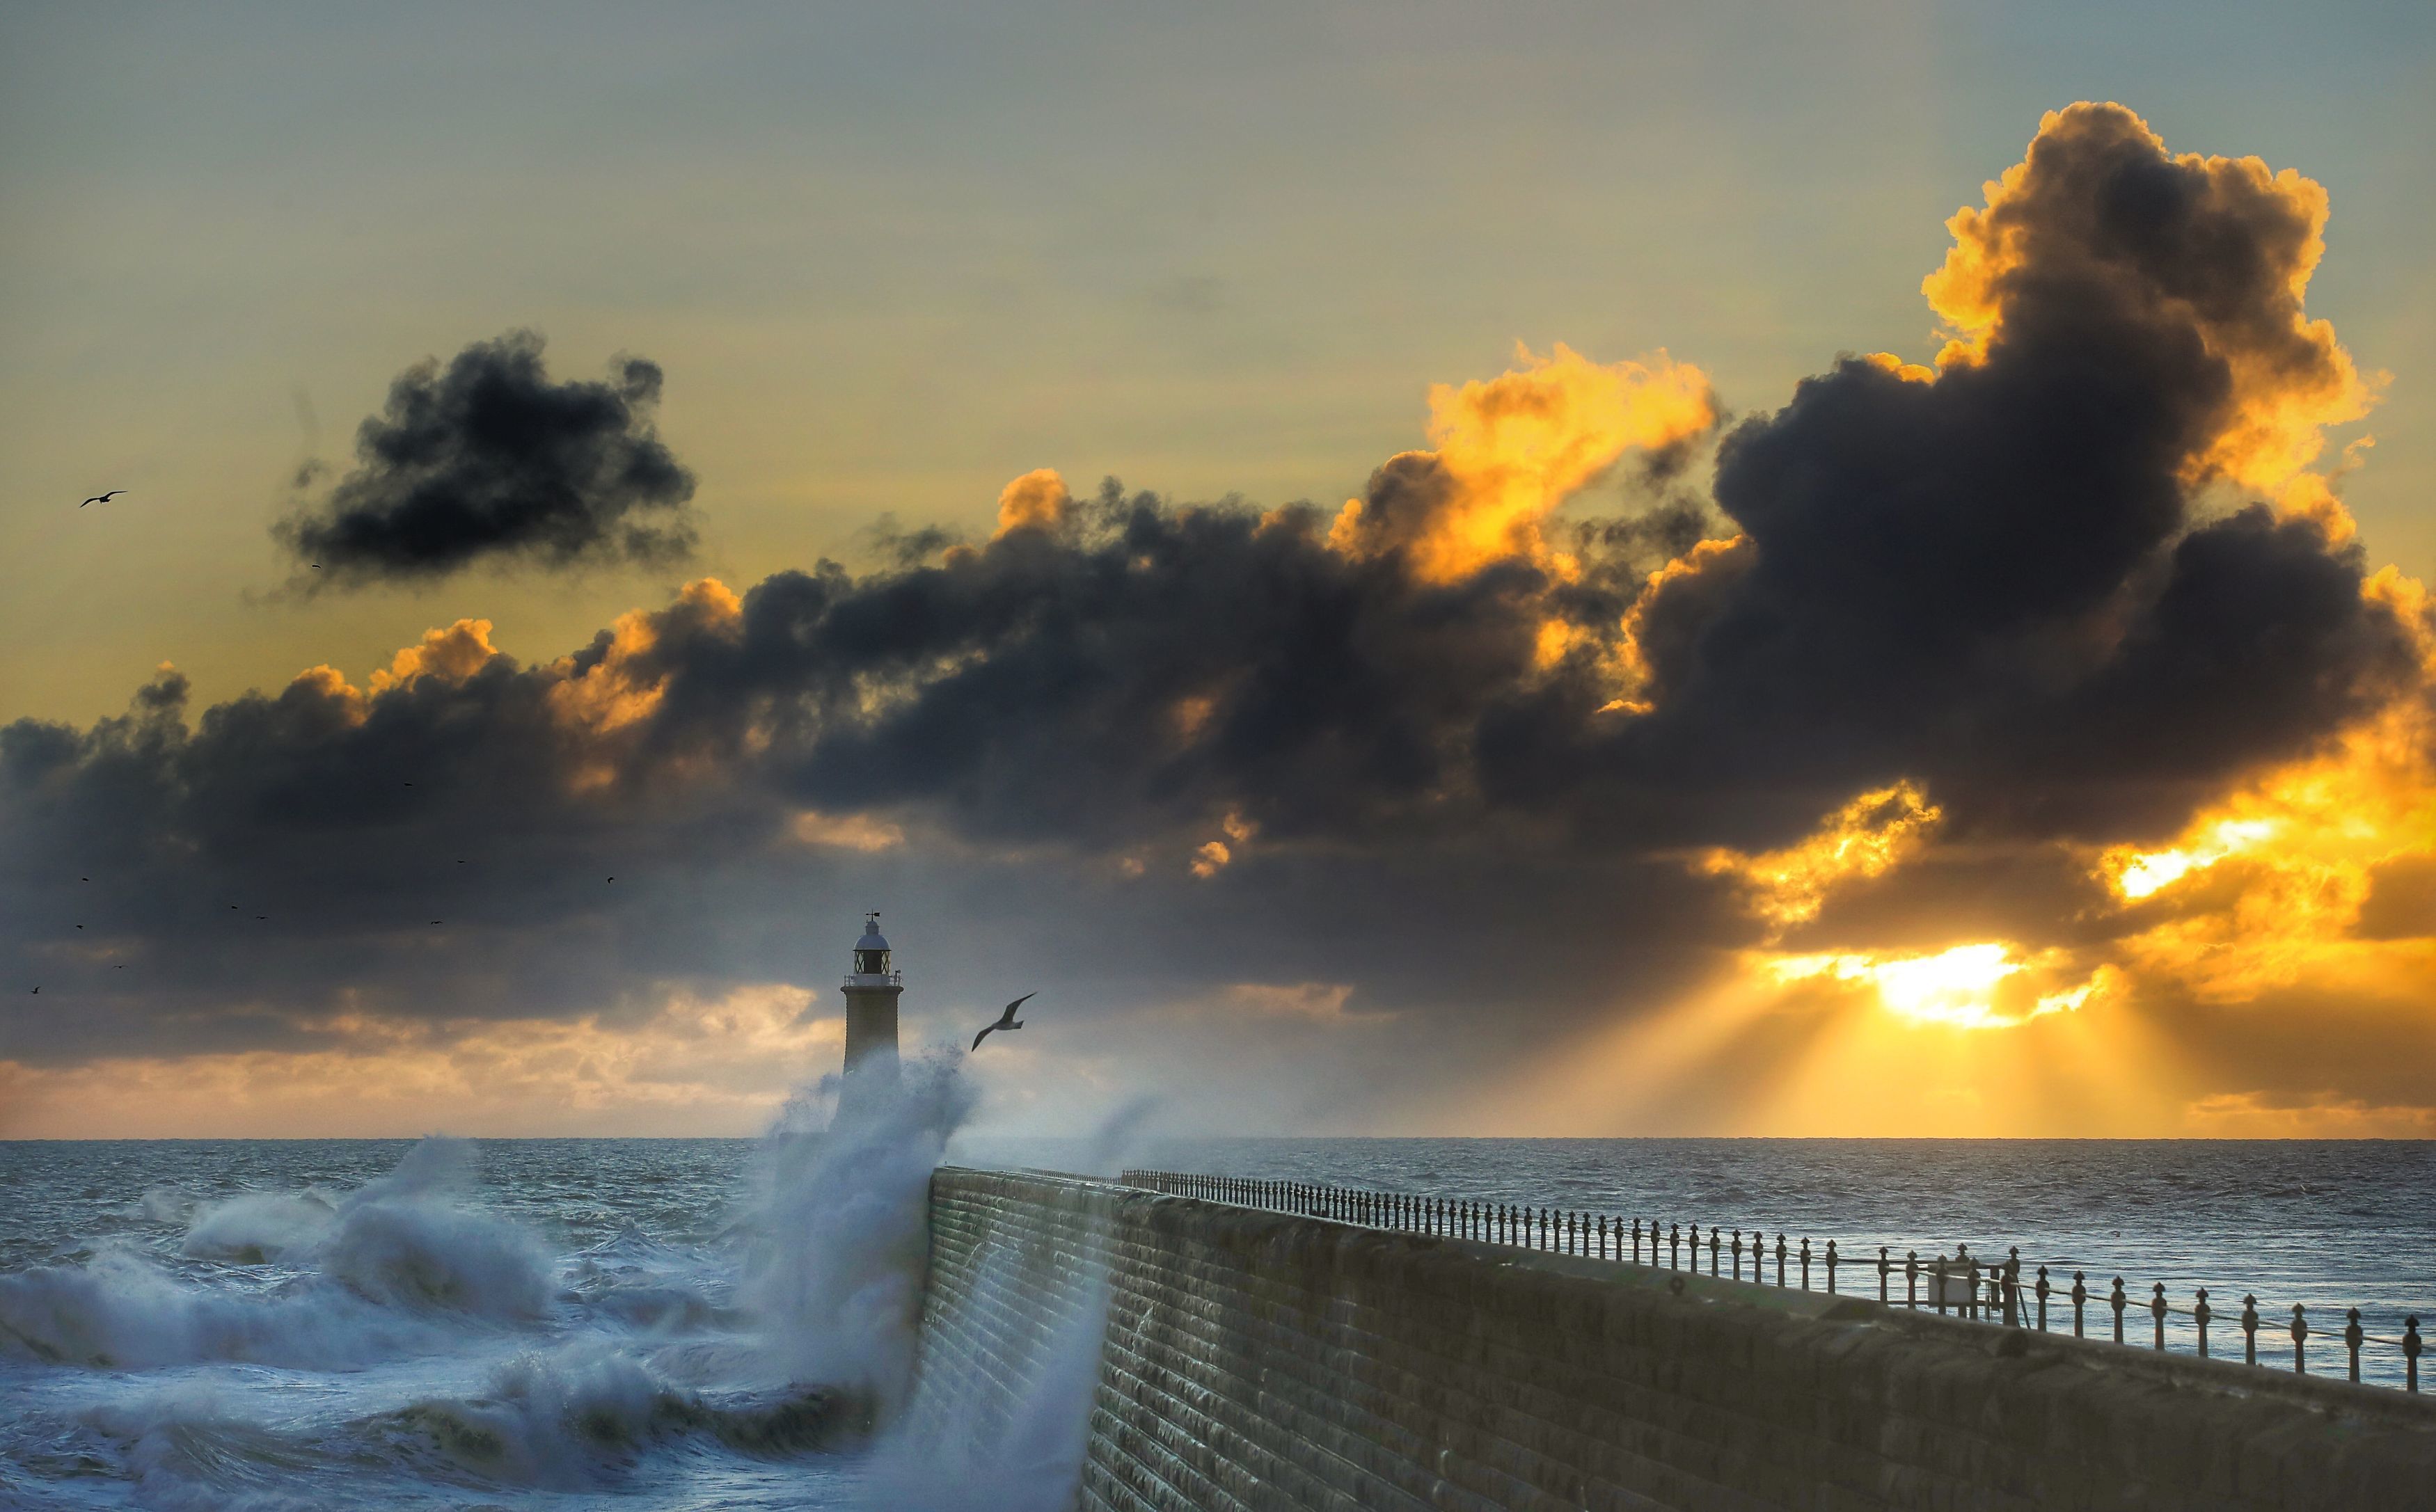 Rough seas are buffeted against Tynemouth Pier, as the sun rises in Tynemouth, England, Sunday, Oct. 28, 2018. (Owen Humphreys/PA via AP)